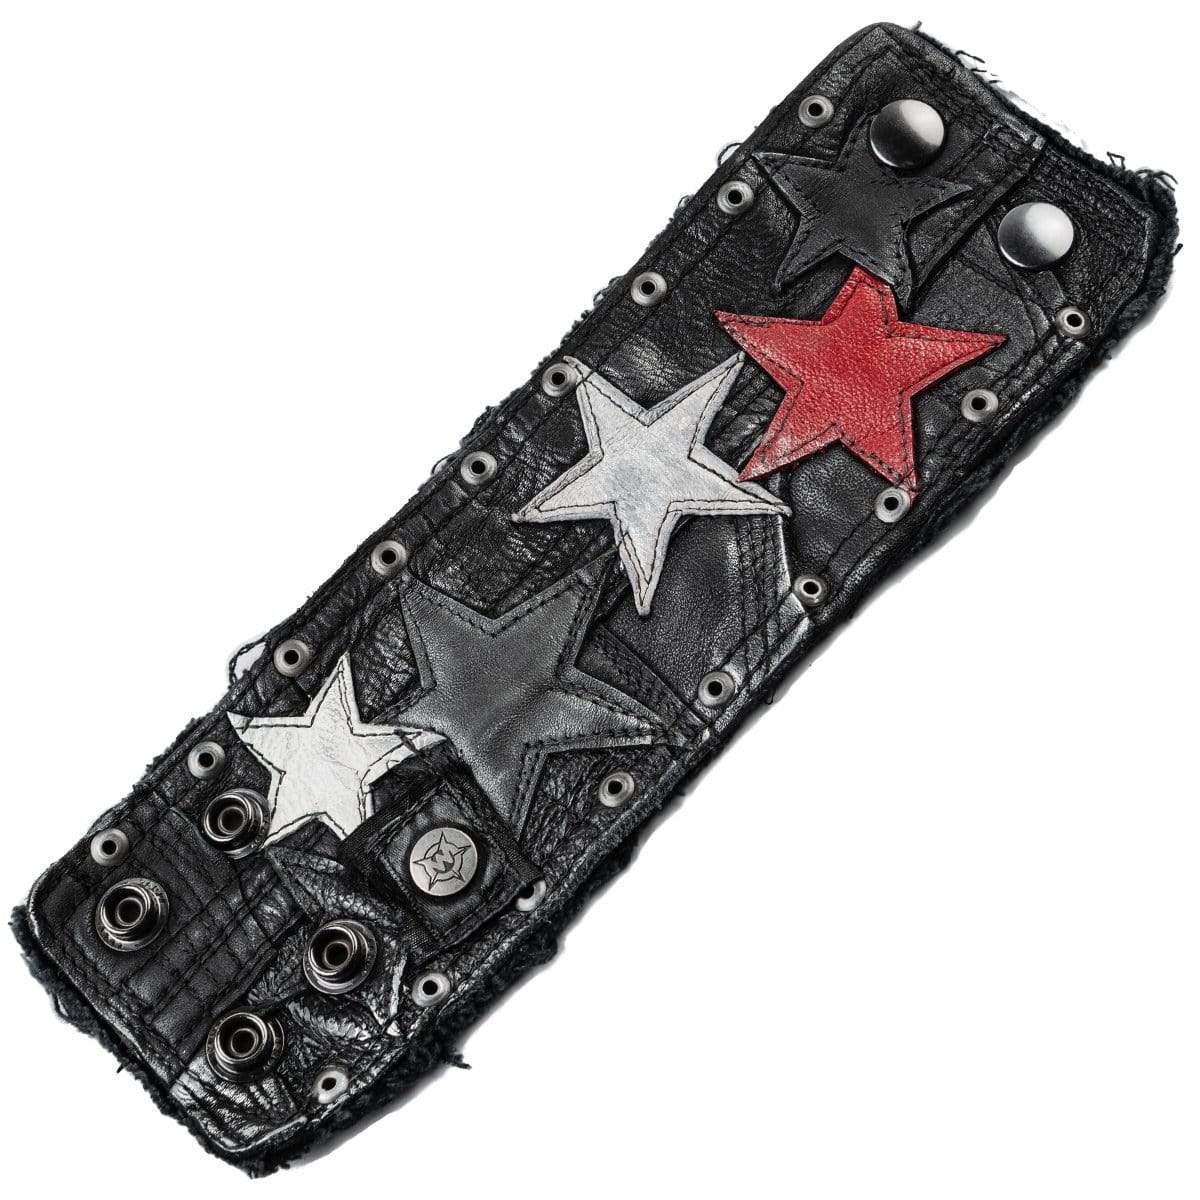 • Wornstar Custom Stage Wear Collection• Custom leather wrist band• Completely hand-made • Designed, made, and sold exclusively by Wornstar Clothing• Individually made; each one will vary slightly• Made with soft leather• Lined with fabric for comfort• Hand-studded detail• Hand-painted• Hand-distressed•